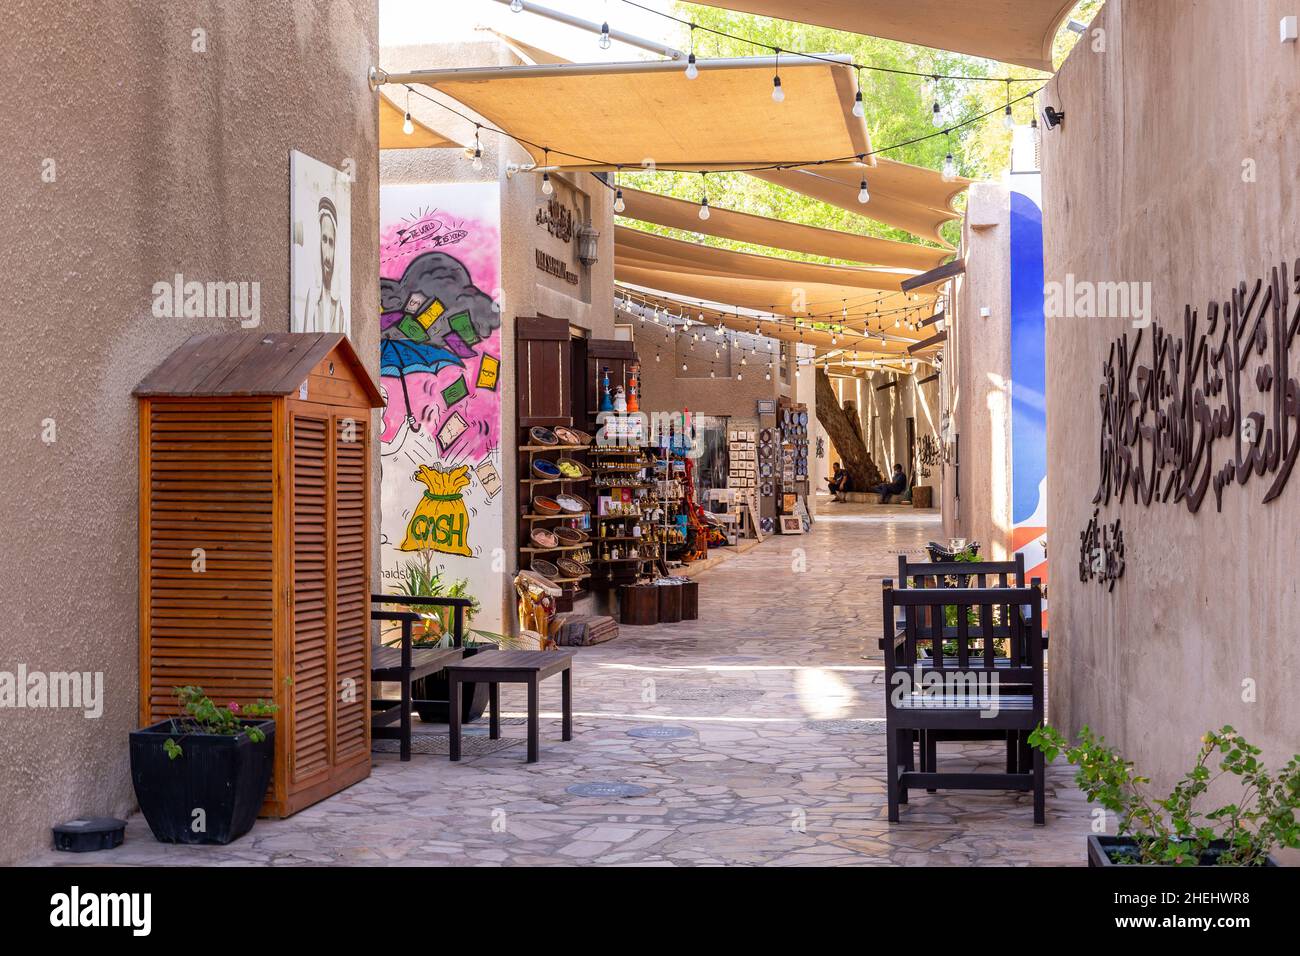 Dubai, UAE, 27.09.2021. Al Fahidi Historical District charming stone street with traditional craft souvenir and spices shops (souk) and sunshades. Stock Photo